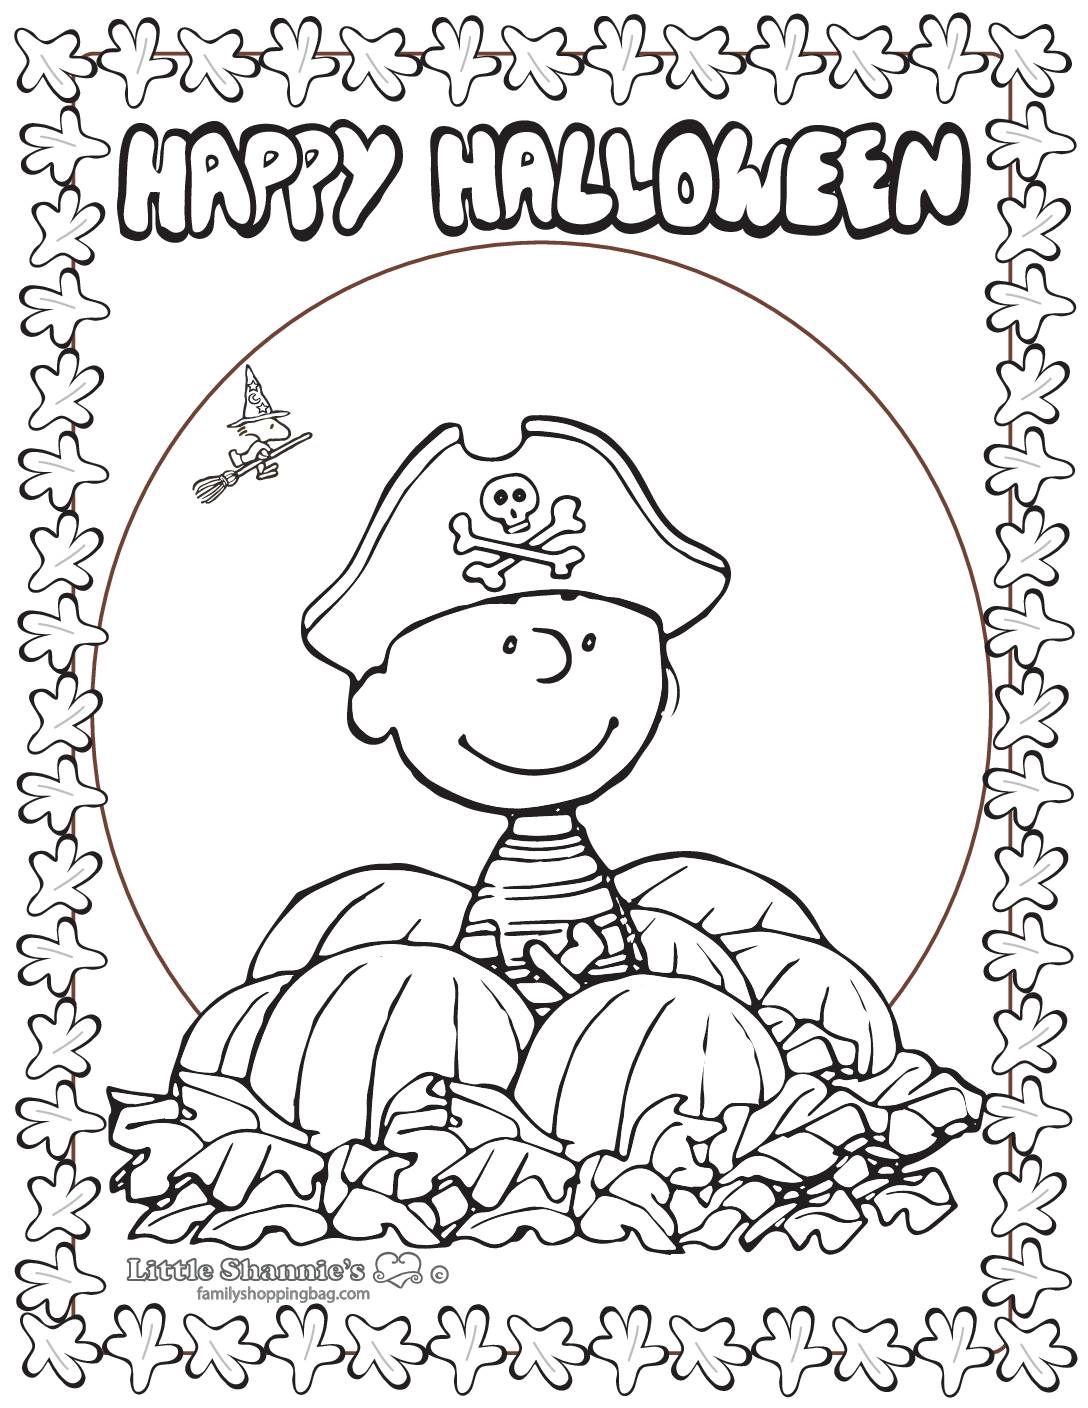 Coloring Page 2 Peanuts Halloween